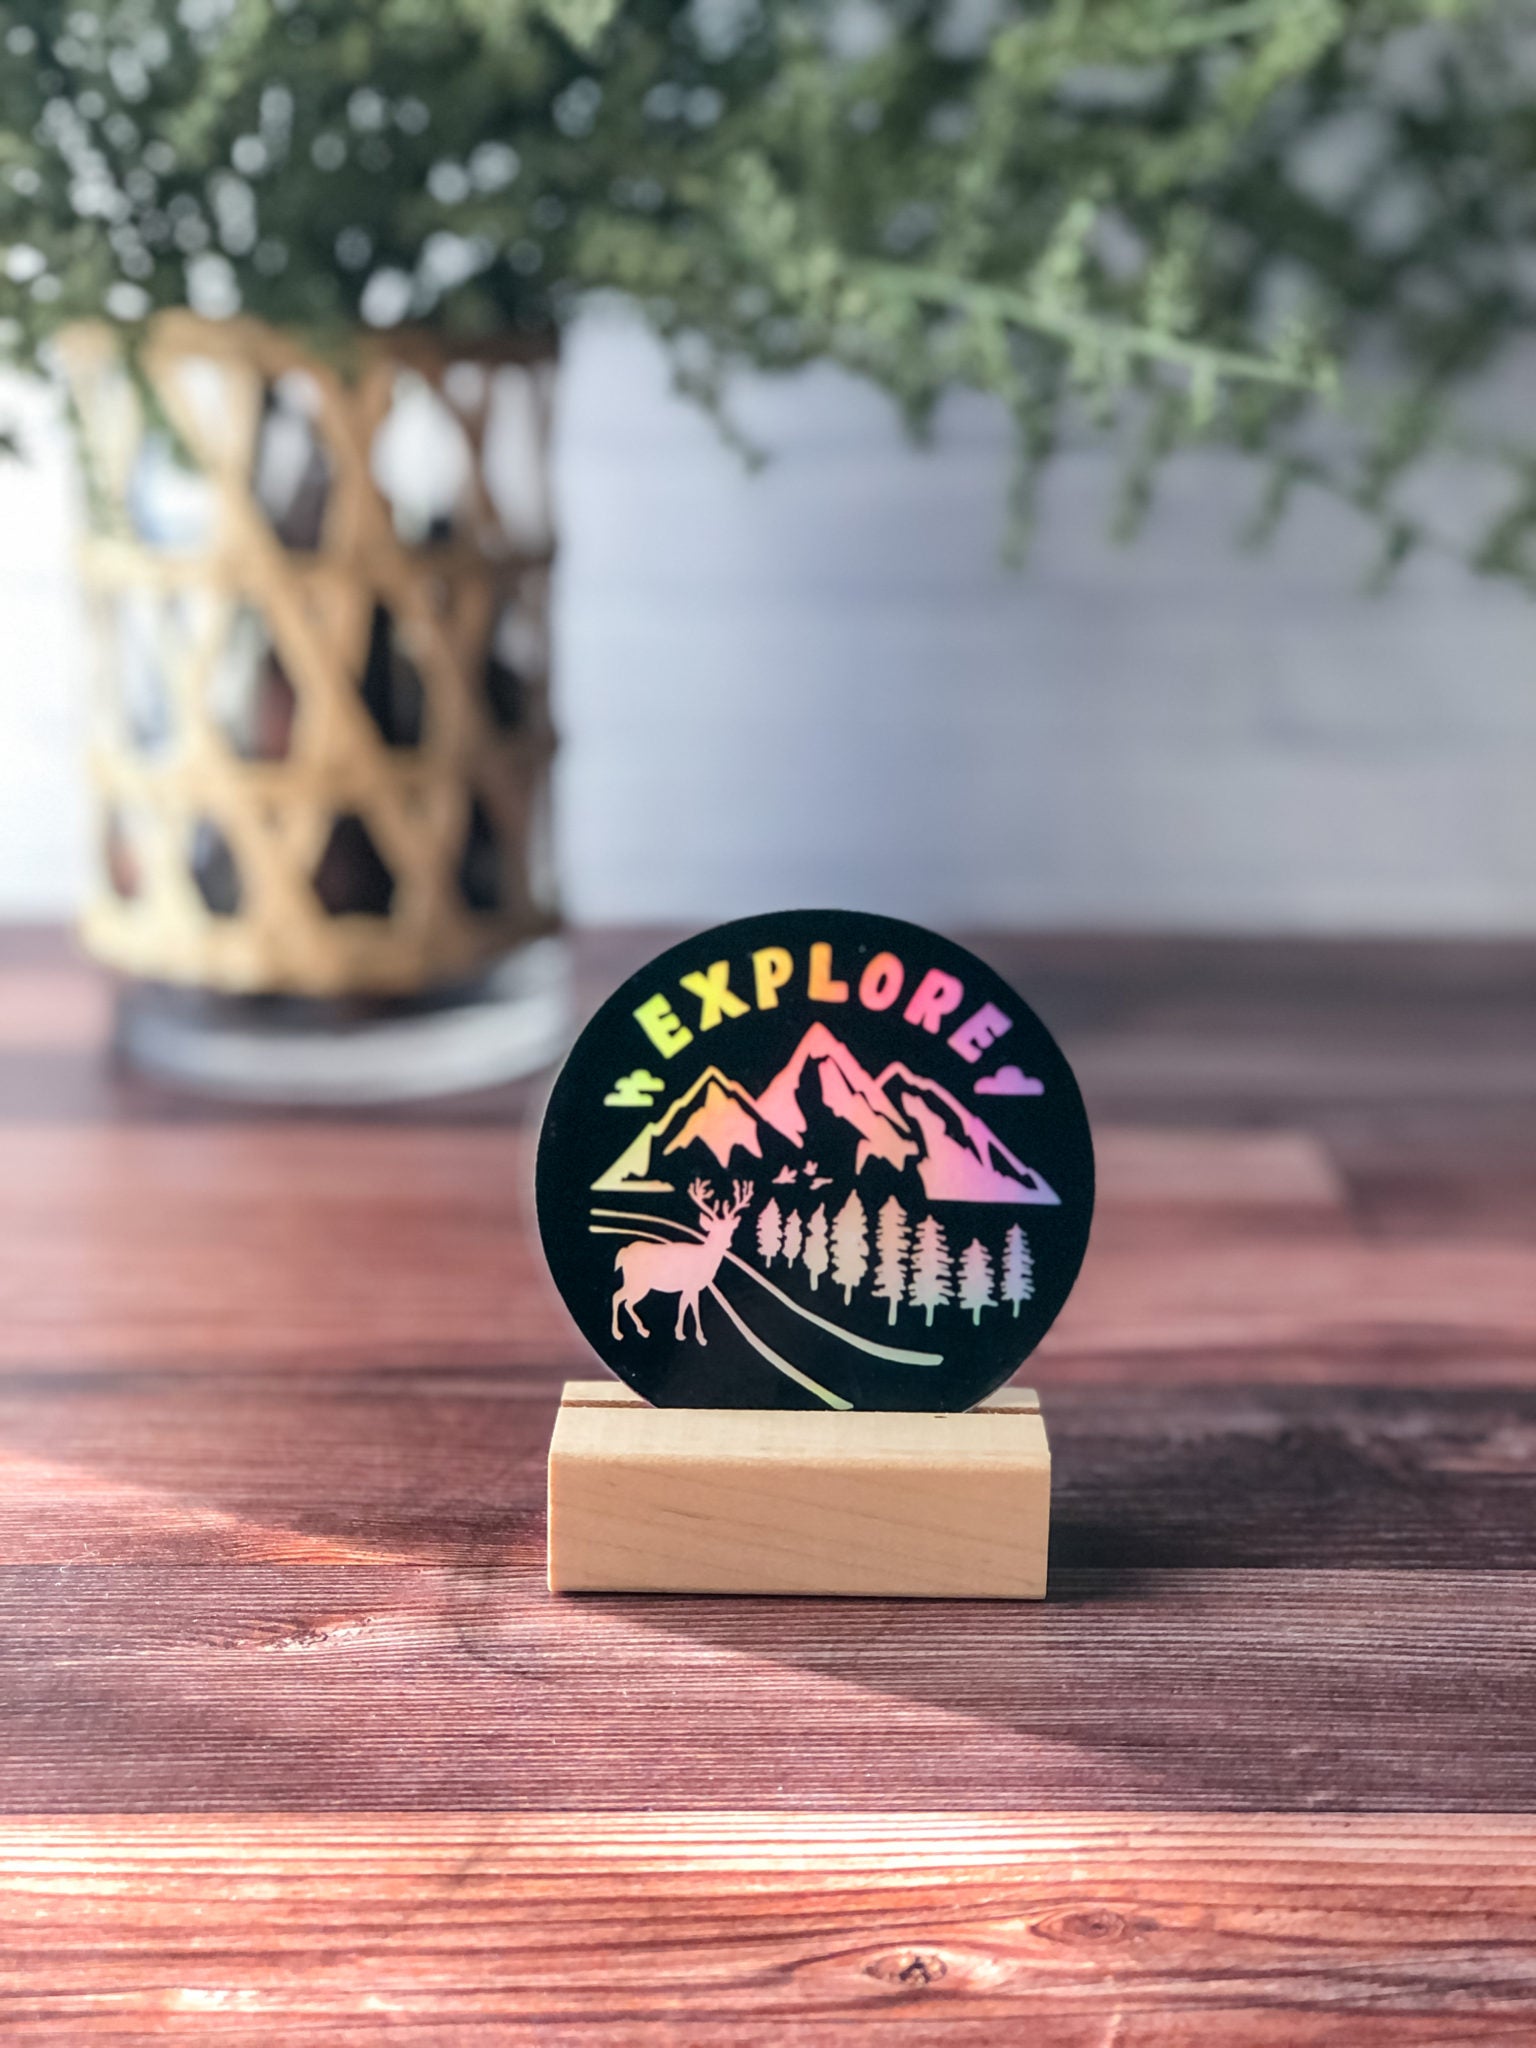 holographic sticker with word "explore" and nature designs of mountains, pine trees, and deer